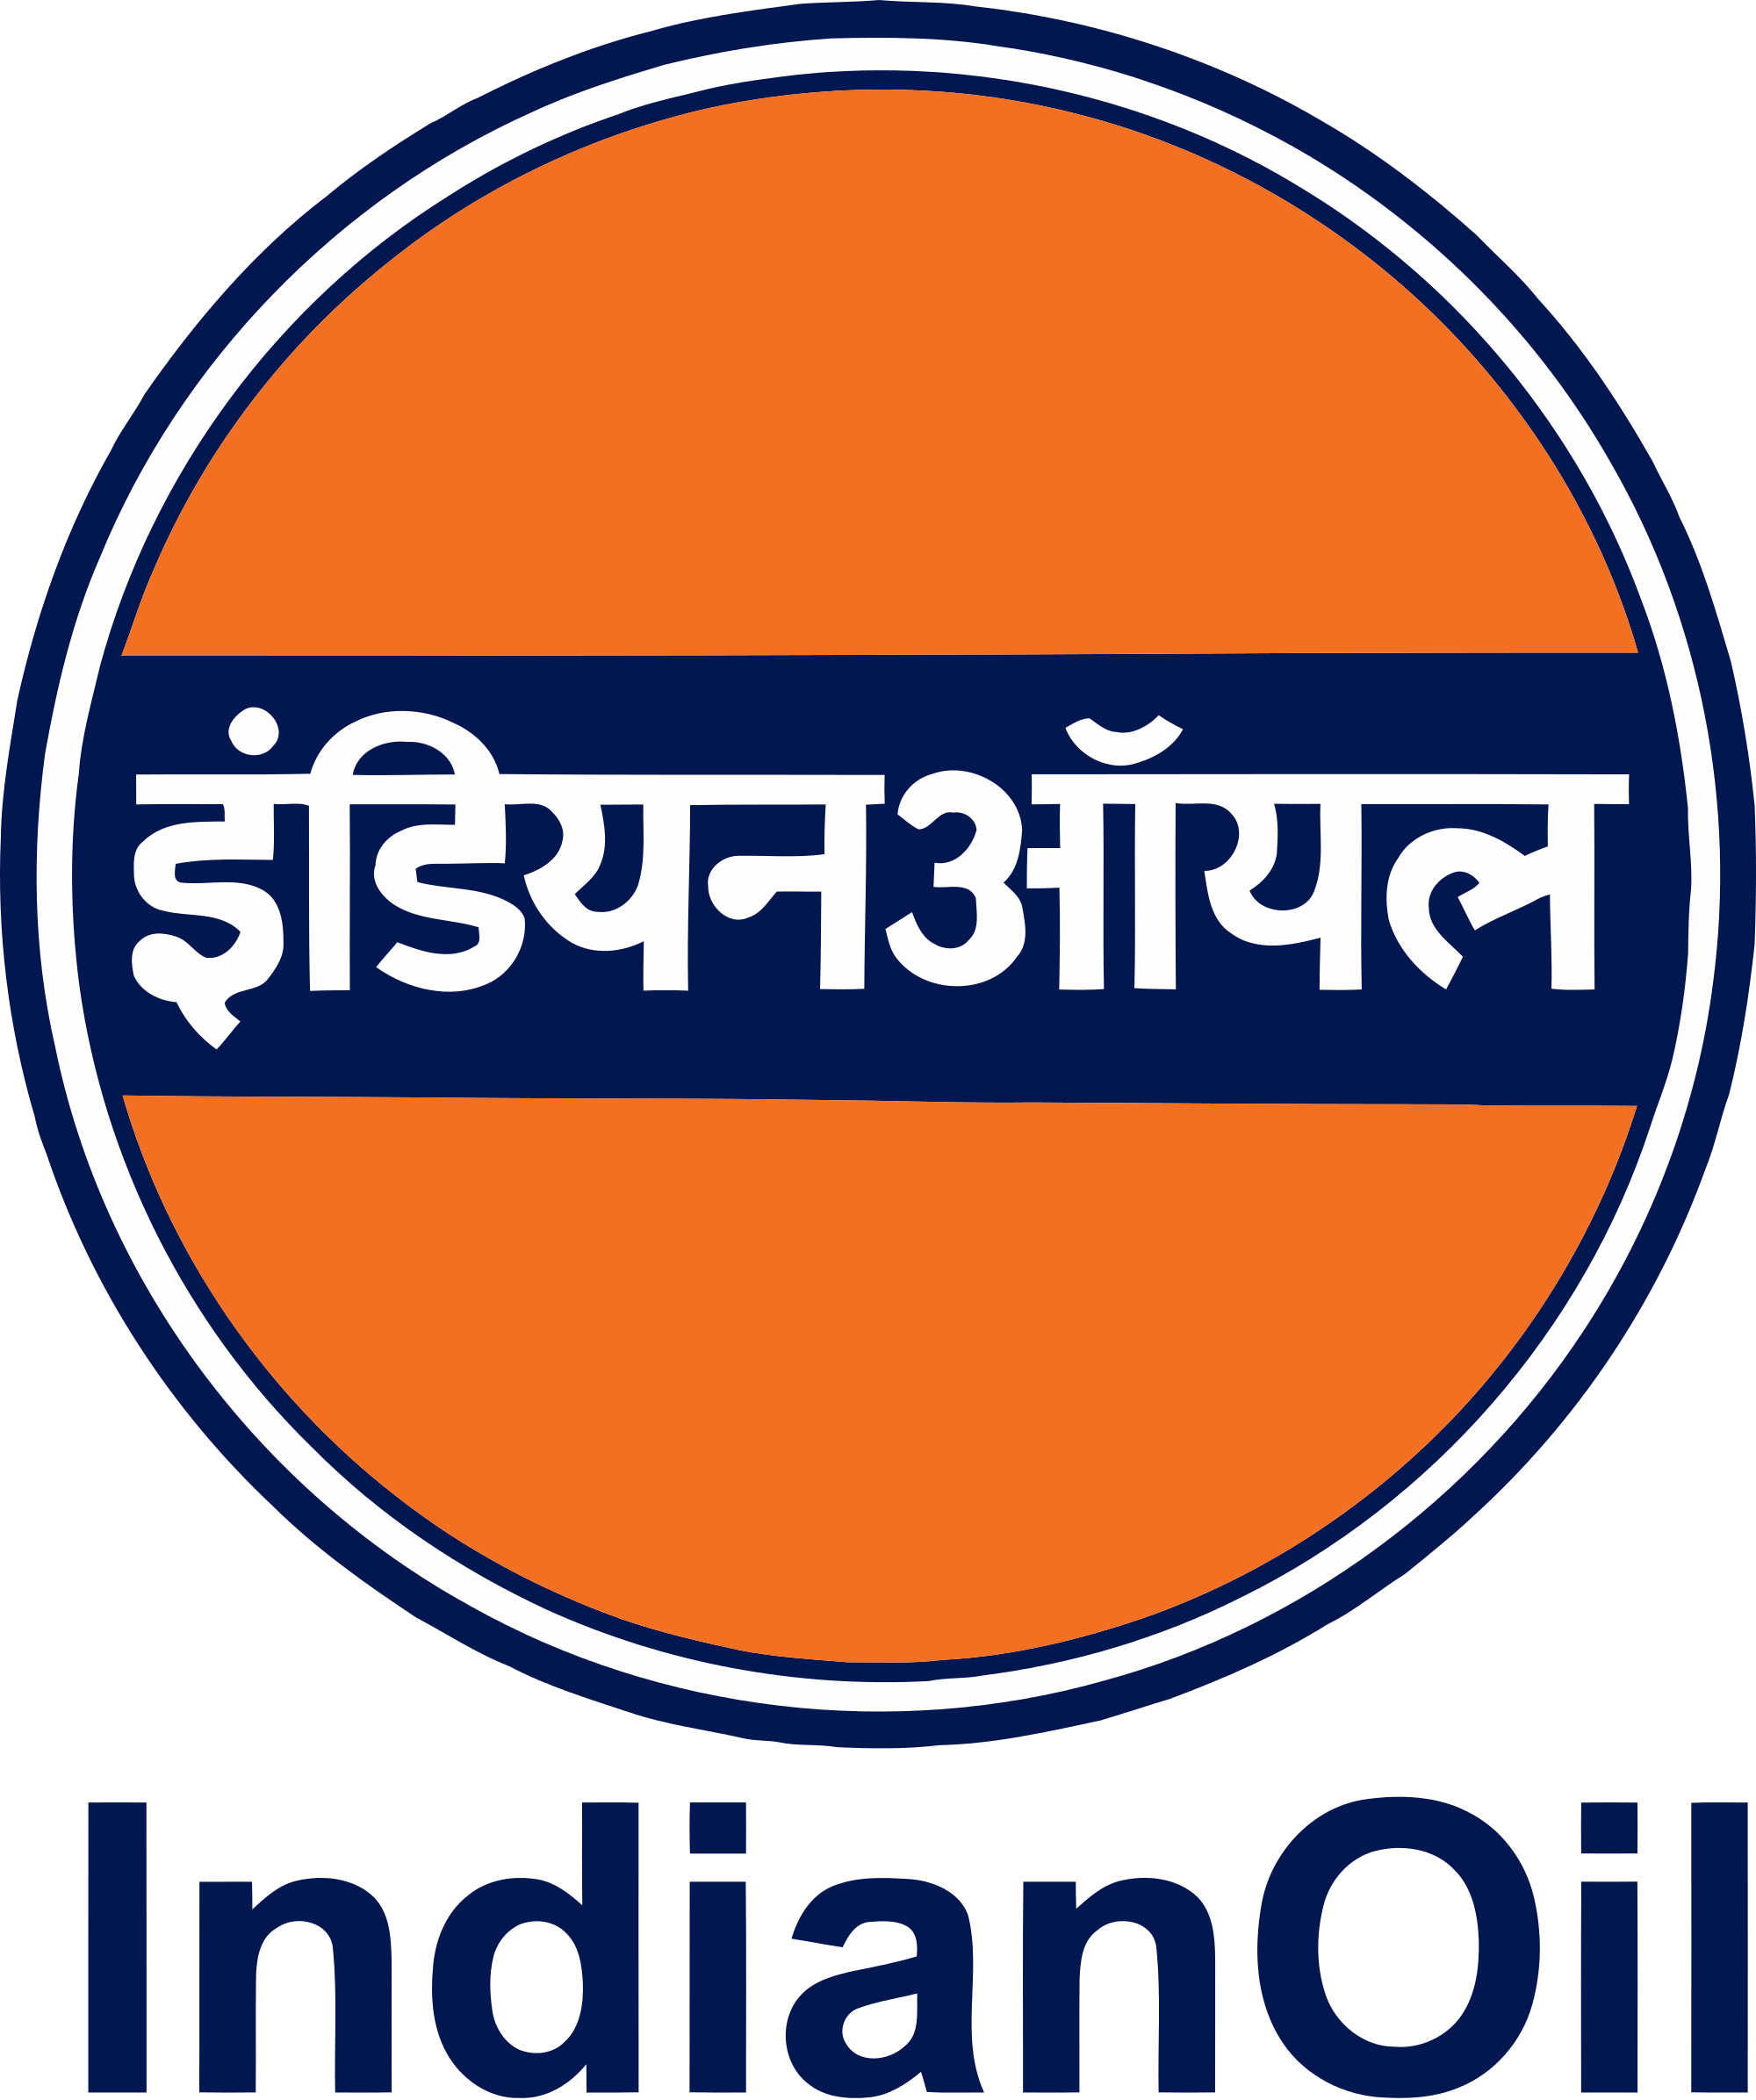 India's Largest Oil & Gas Distribution And Marketing - Indian Oil Corporation Limited Iocl (2000x2392)